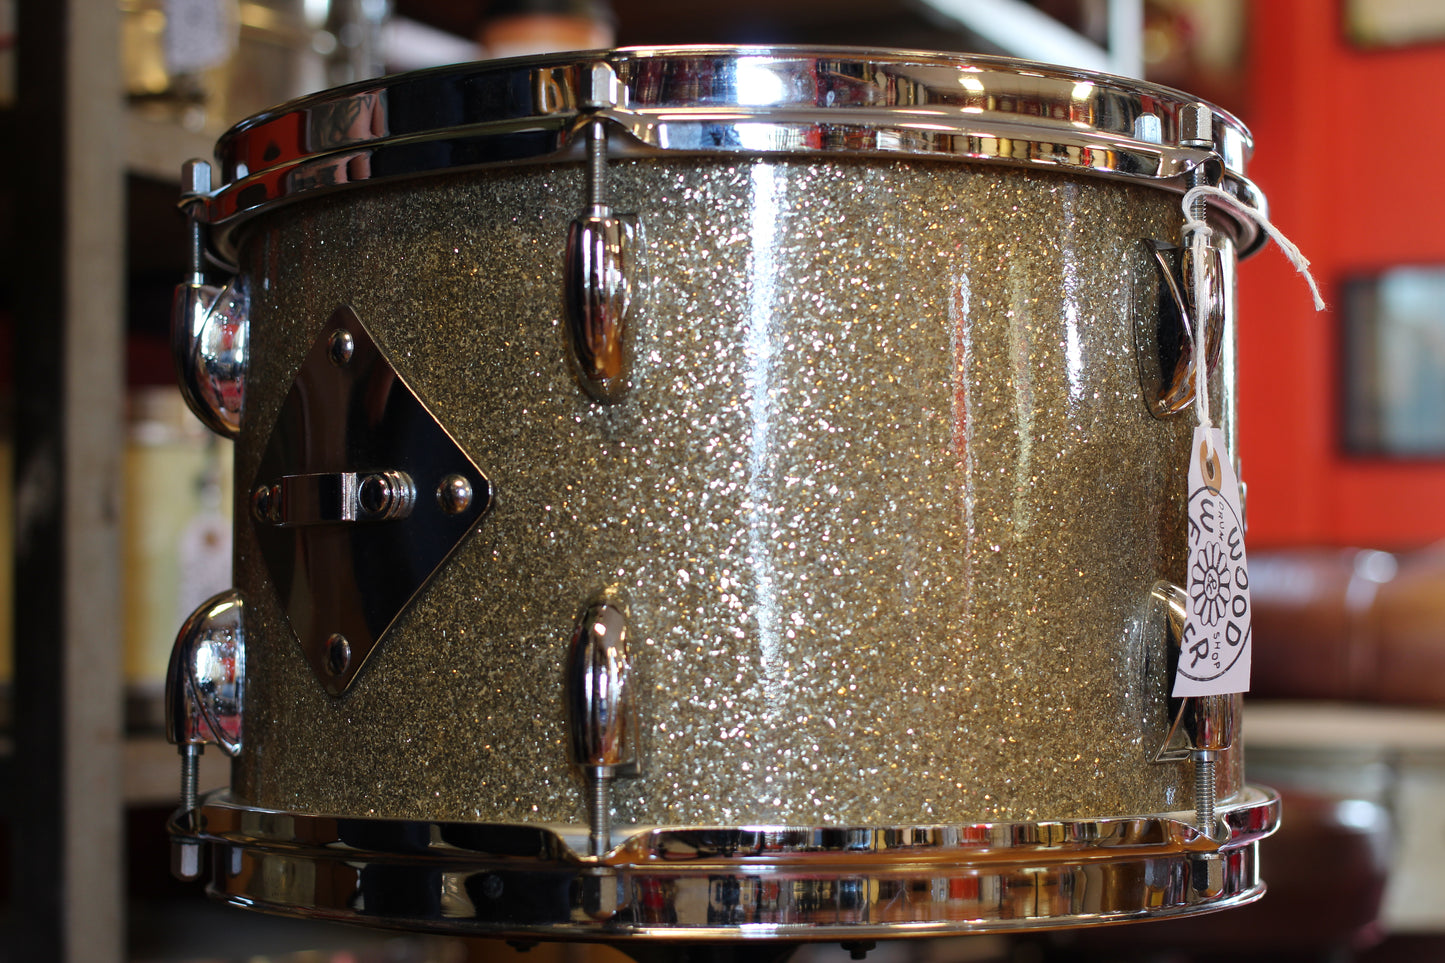 1967 Walberg & Auge 'Perfection' Drum Kit in Ginger Ale Sparkle 14x20 16x14 8x12 5x14